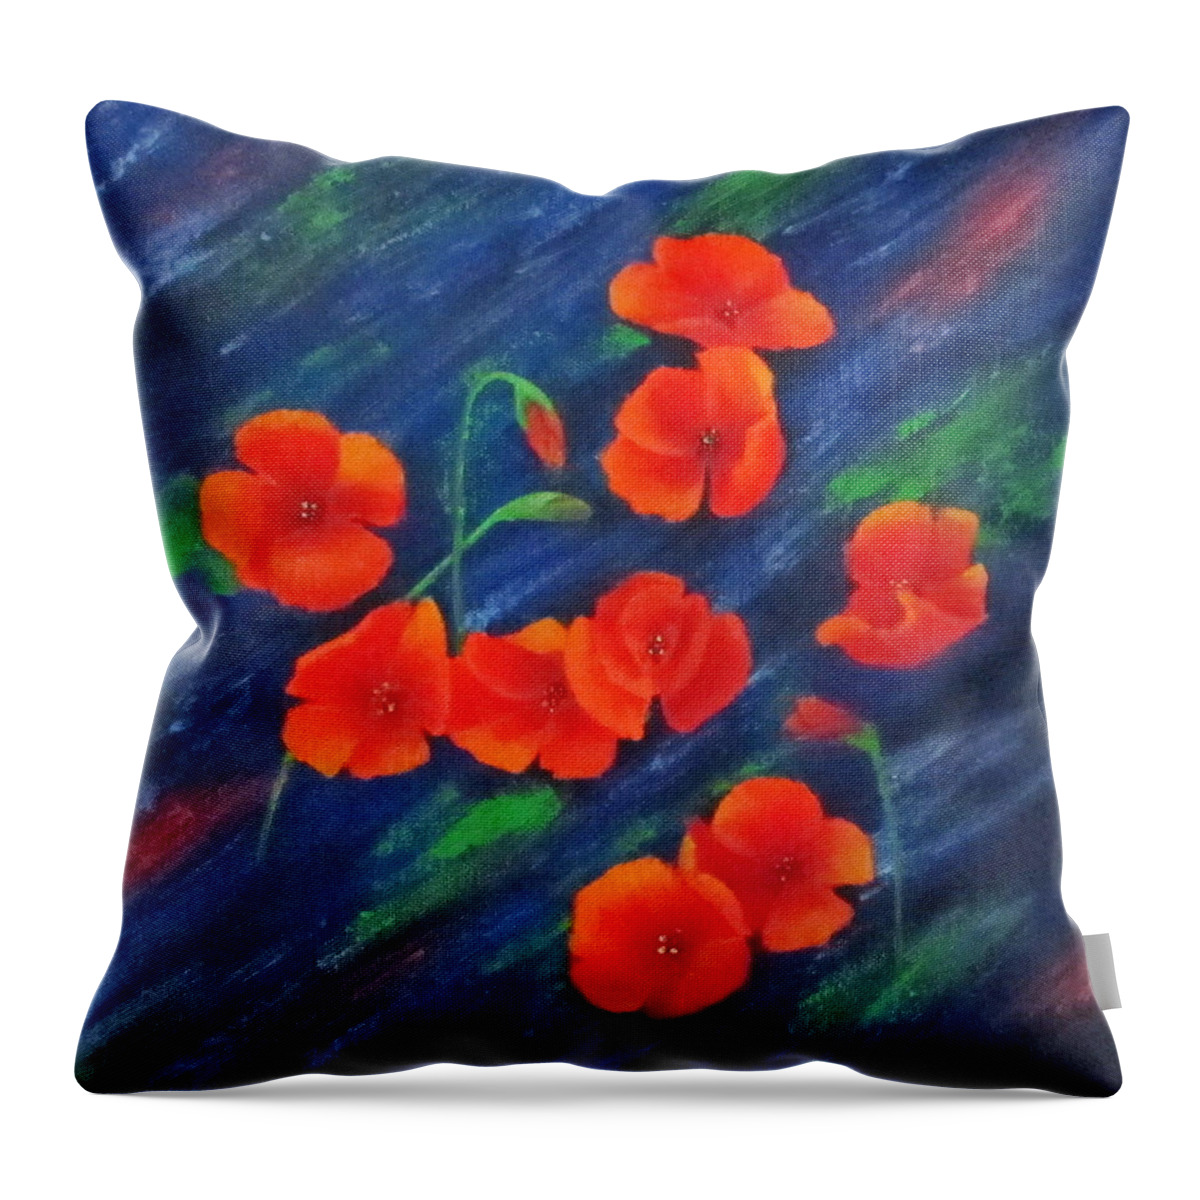 Still Life Throw Pillow featuring the painting Poppies In Abstract by Roseann Gilmore